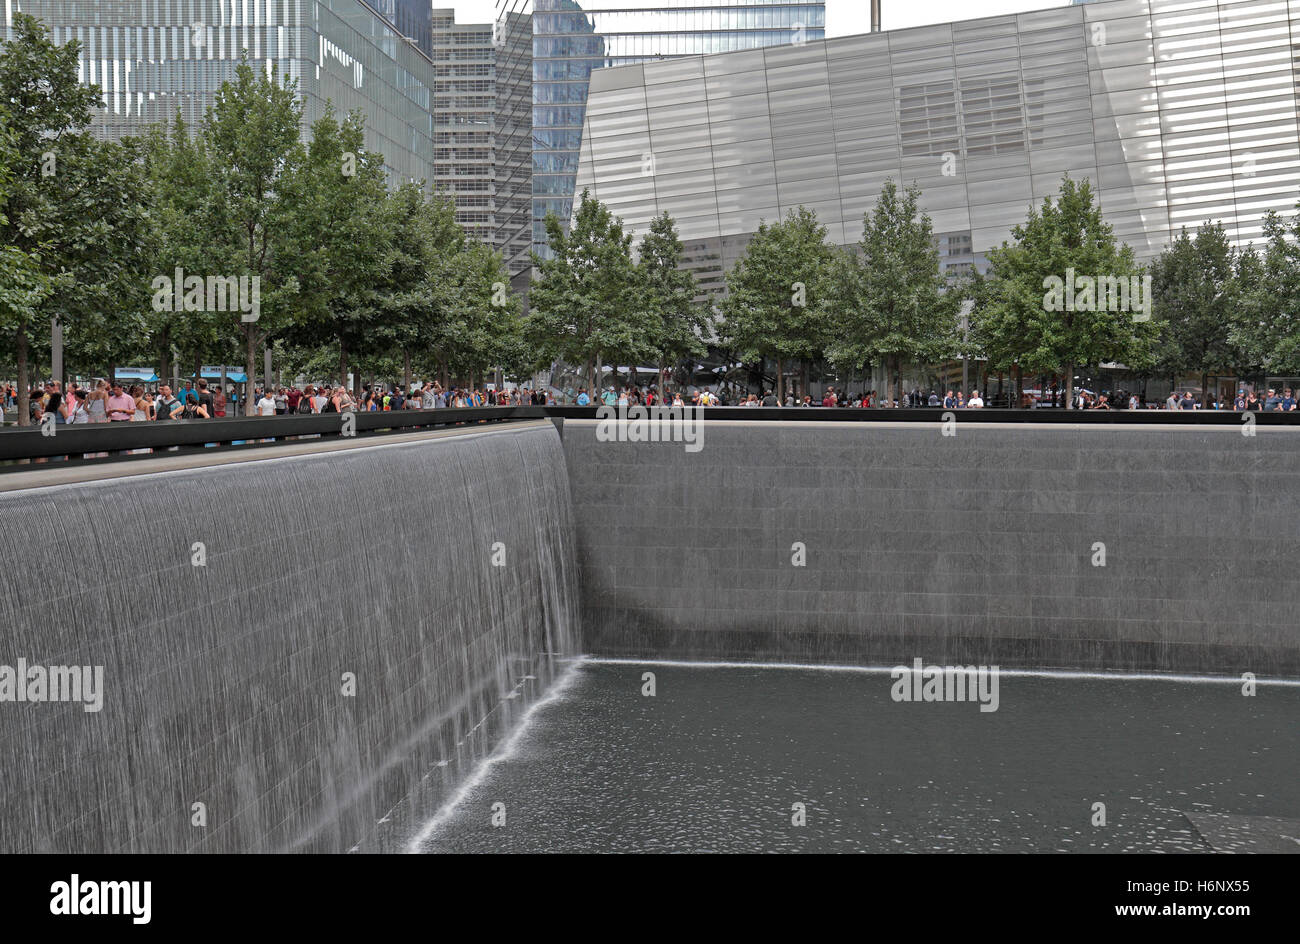 One of the pools which comprise the National September 11 Memorial, Manhattan, New York, United States. Stock Photo